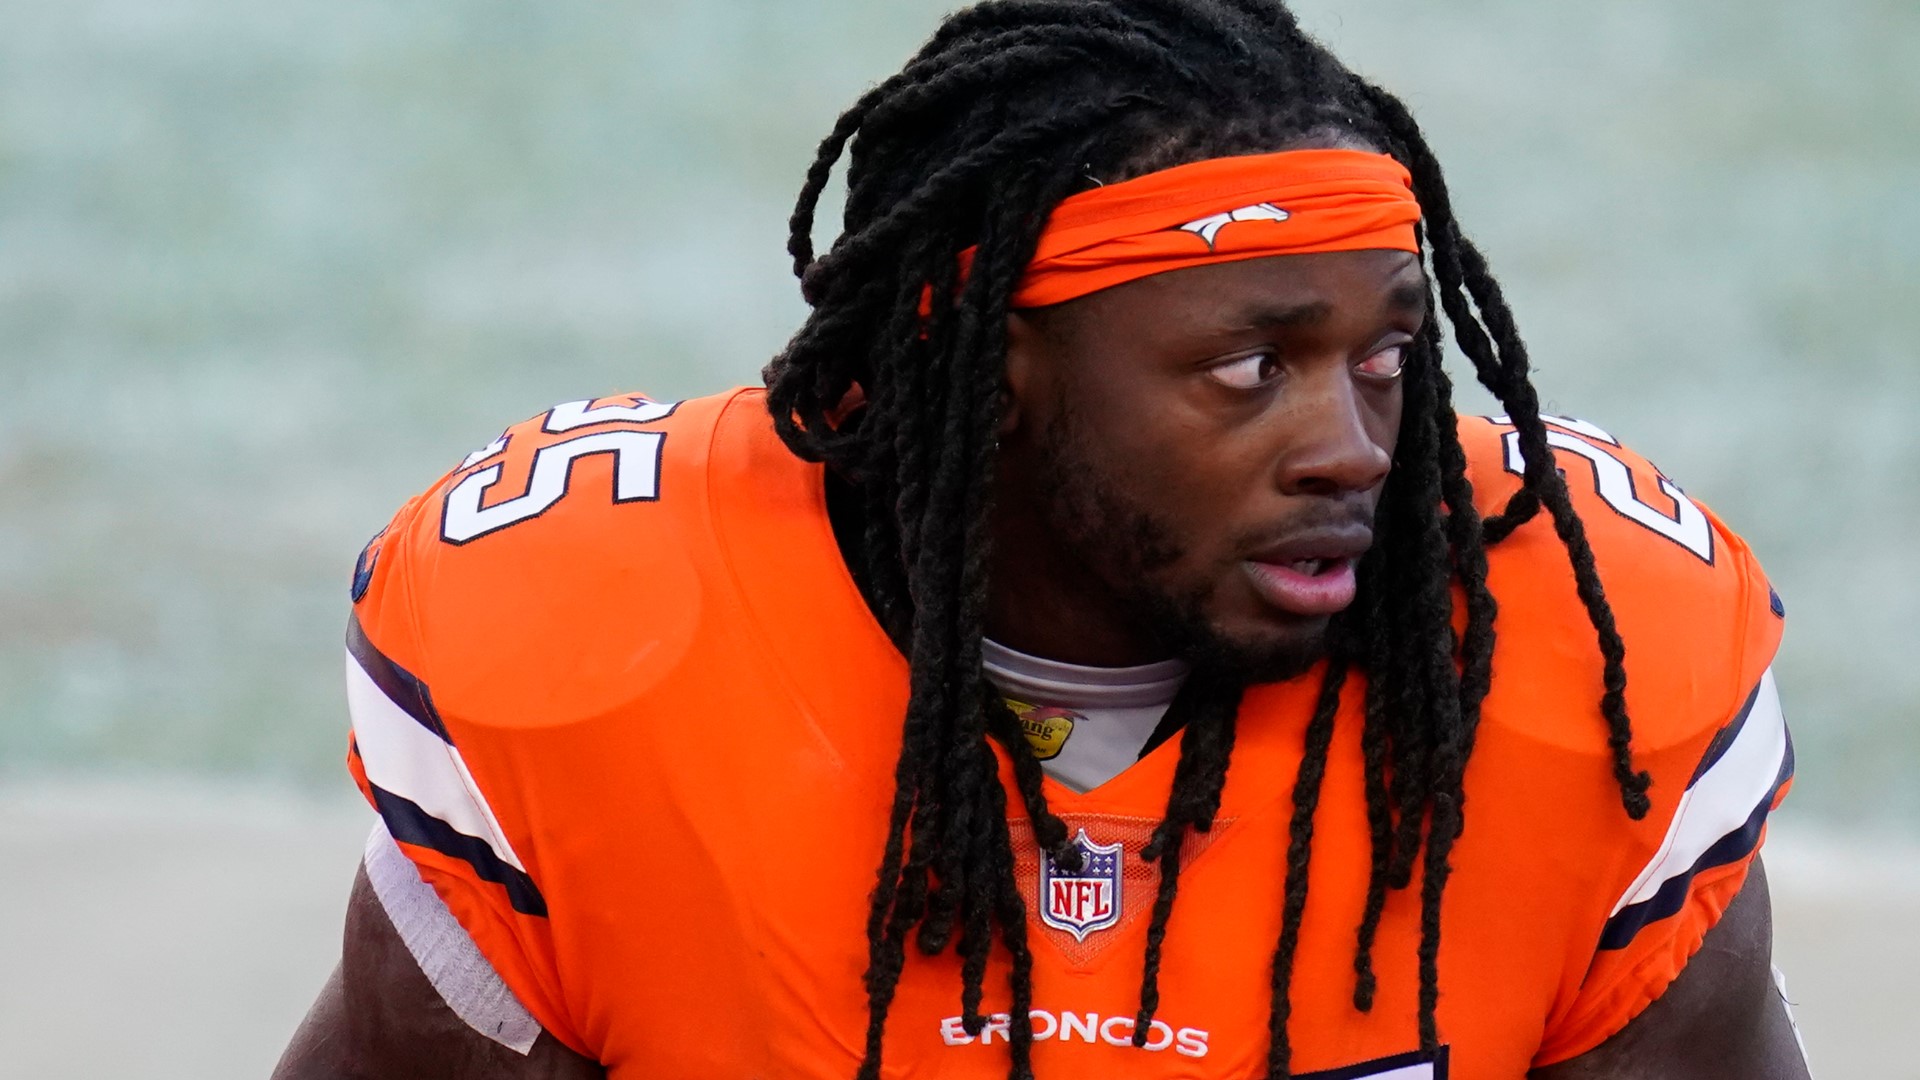 Melvin Gordon did plead guilty to a reckless driving charge stemming from his speeding ticket. But with DUI charges dismissed, Gordon stays with Broncos.